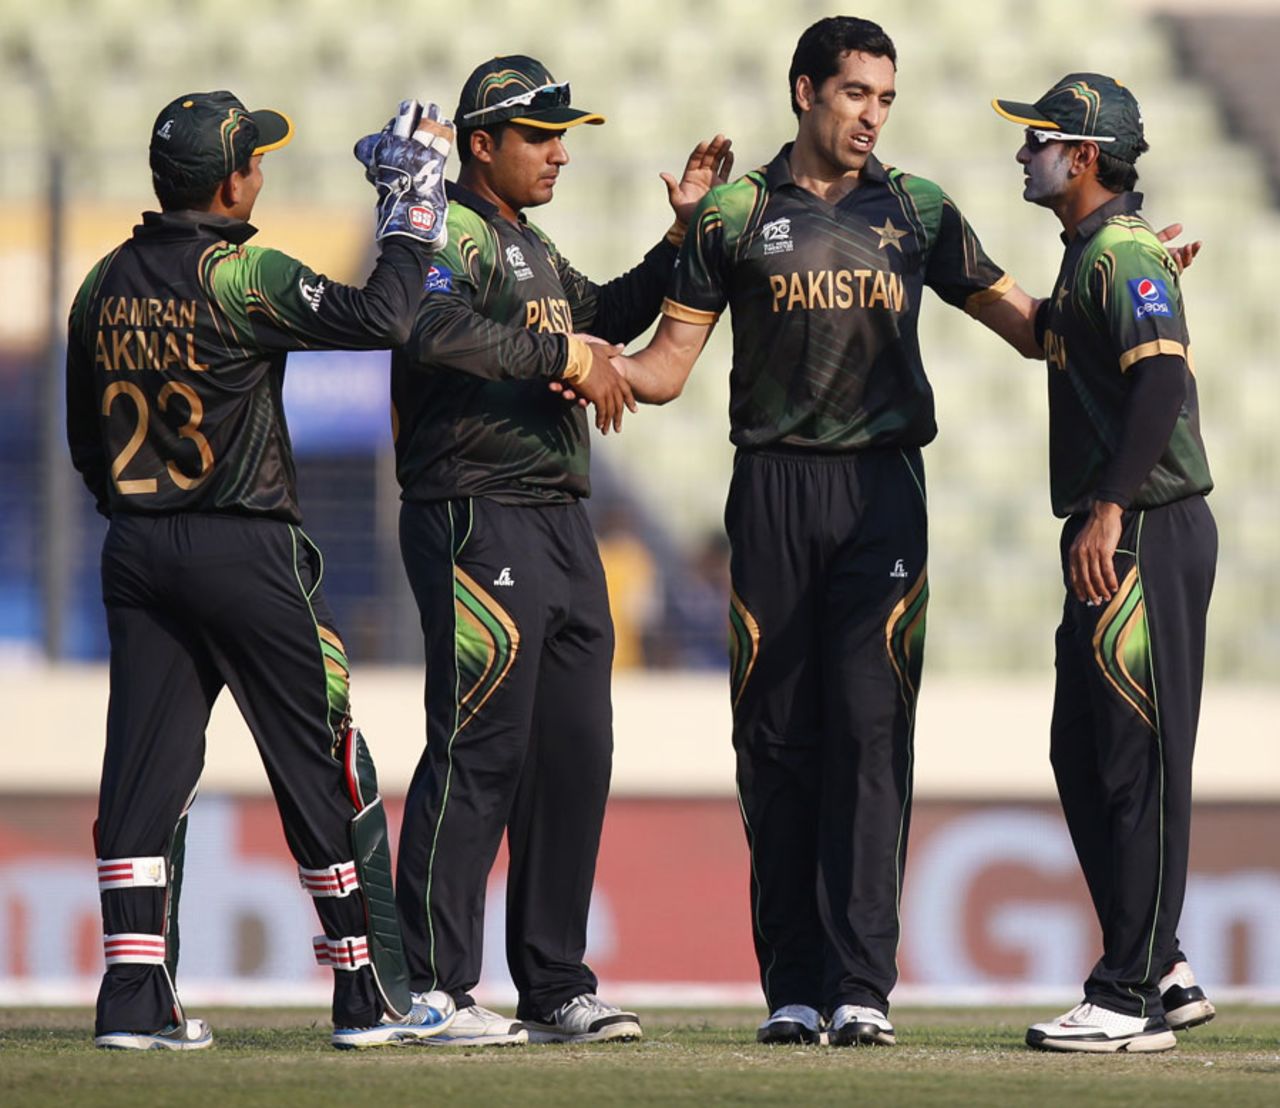 Umar Gul finished with 3 for 16 in his four overs, New Zealand v Pakistan, World Twenty20 warm-ups, Dhaka, March 17, 2014